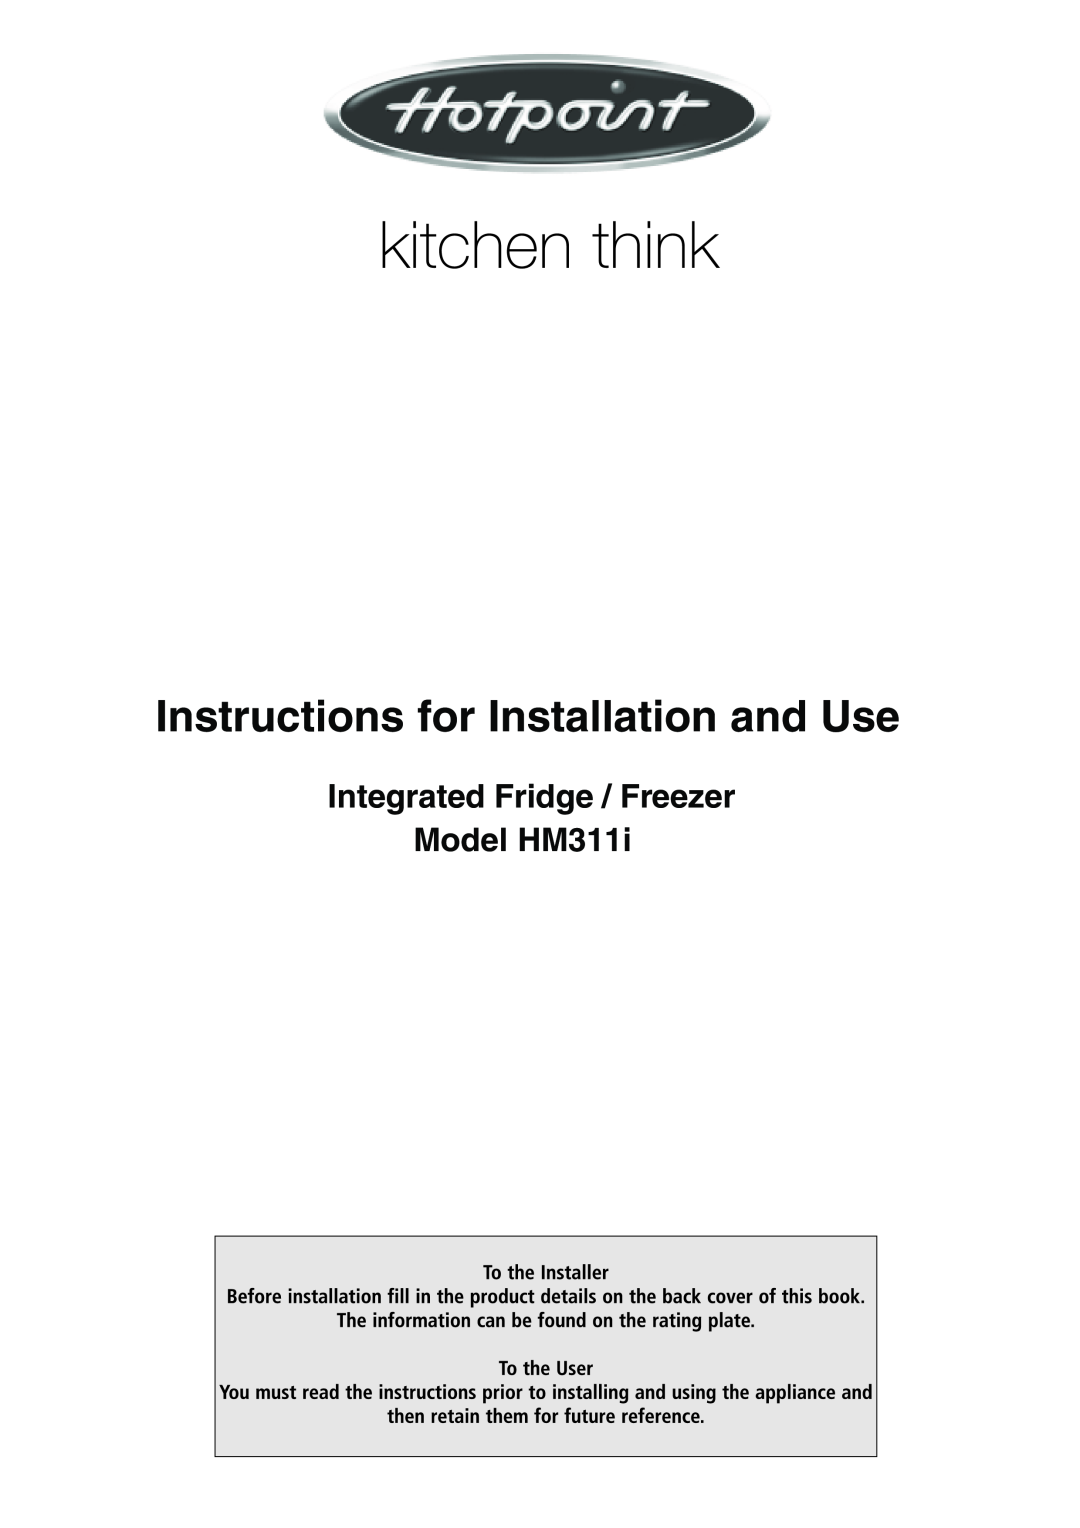 Hotpoint manual Integrated Fridge / Freezer Model HM311i, Instructions for Installation and Use 